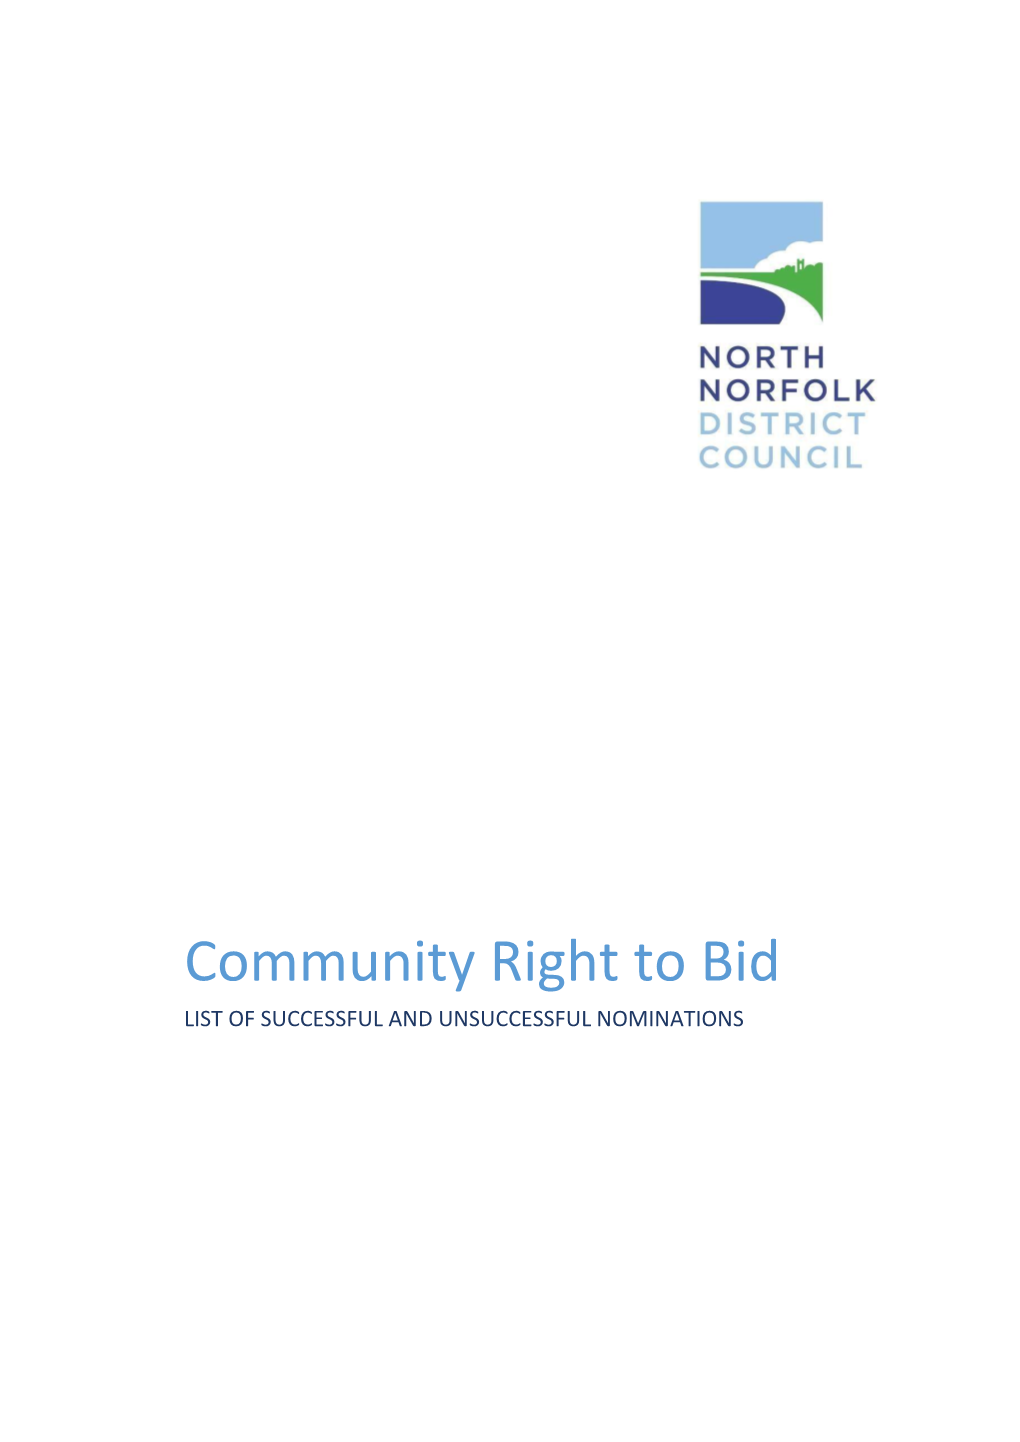 Right to Bid LIST of SUCCESSFUL and UNSUCCESSFUL NOMINATIONS